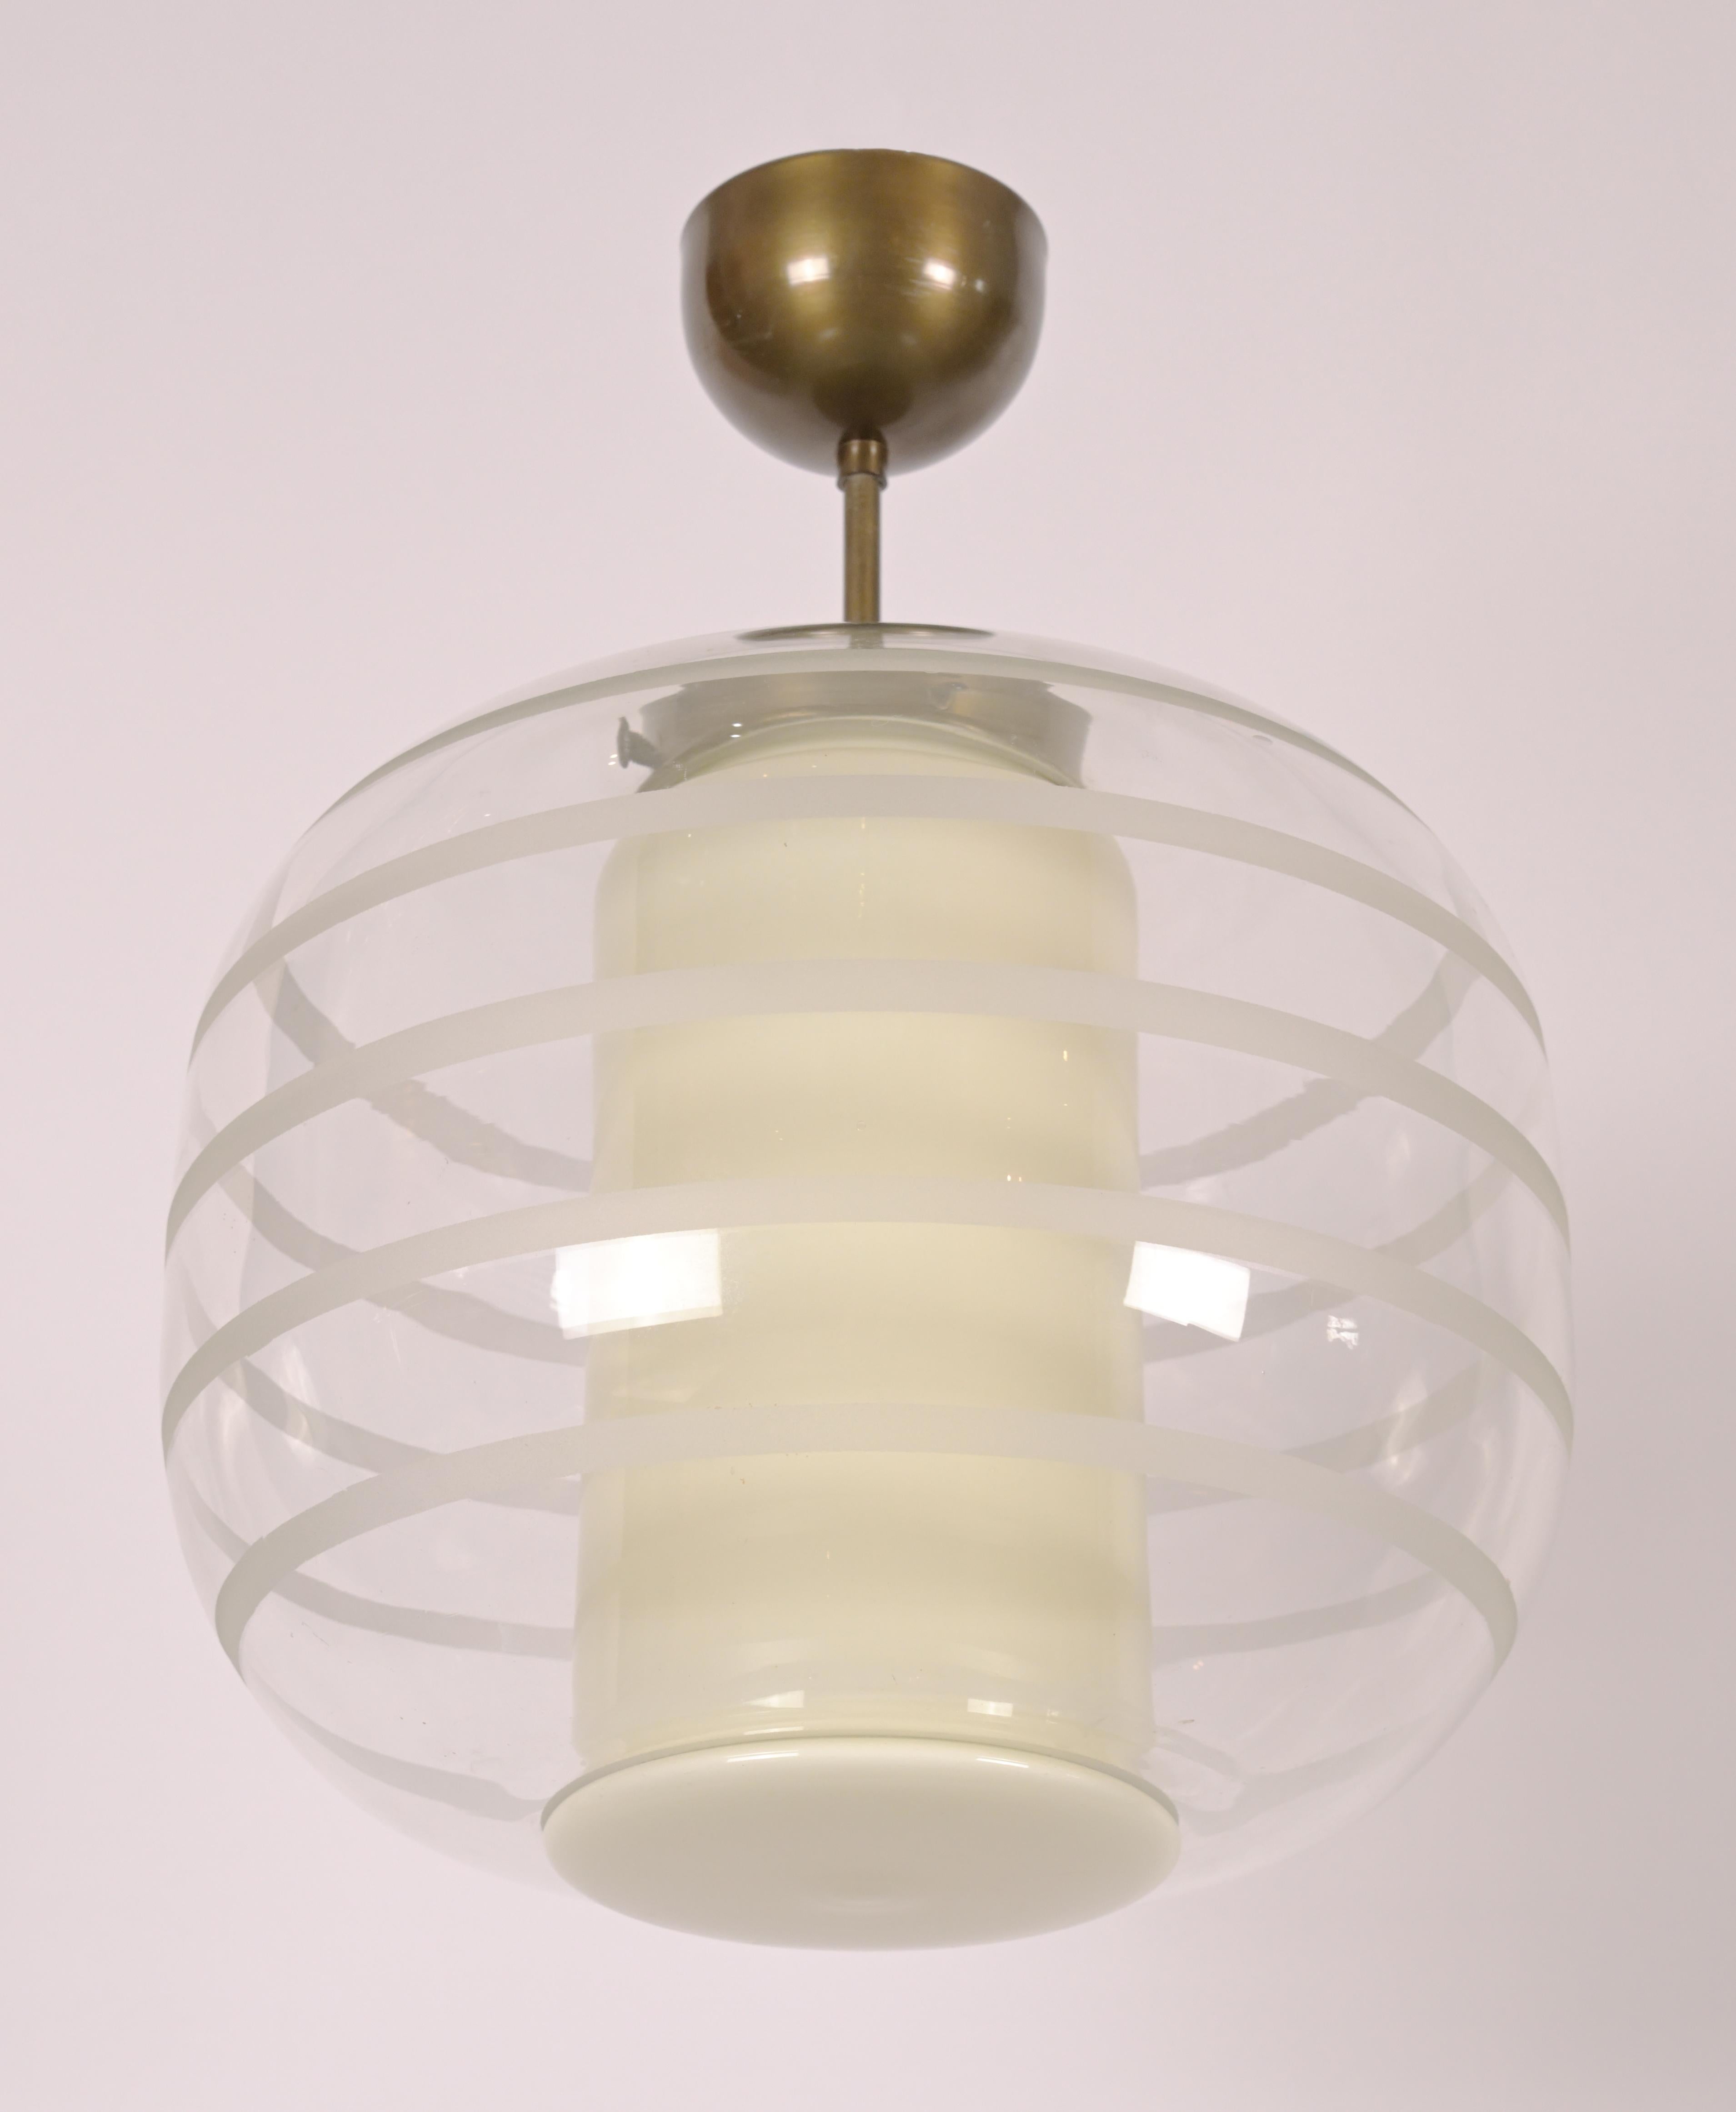 A glass striped sandblasted ceiling lamp designed by Swedish artist Harald Notini (1879 - 1959). Price includes UL wiring.